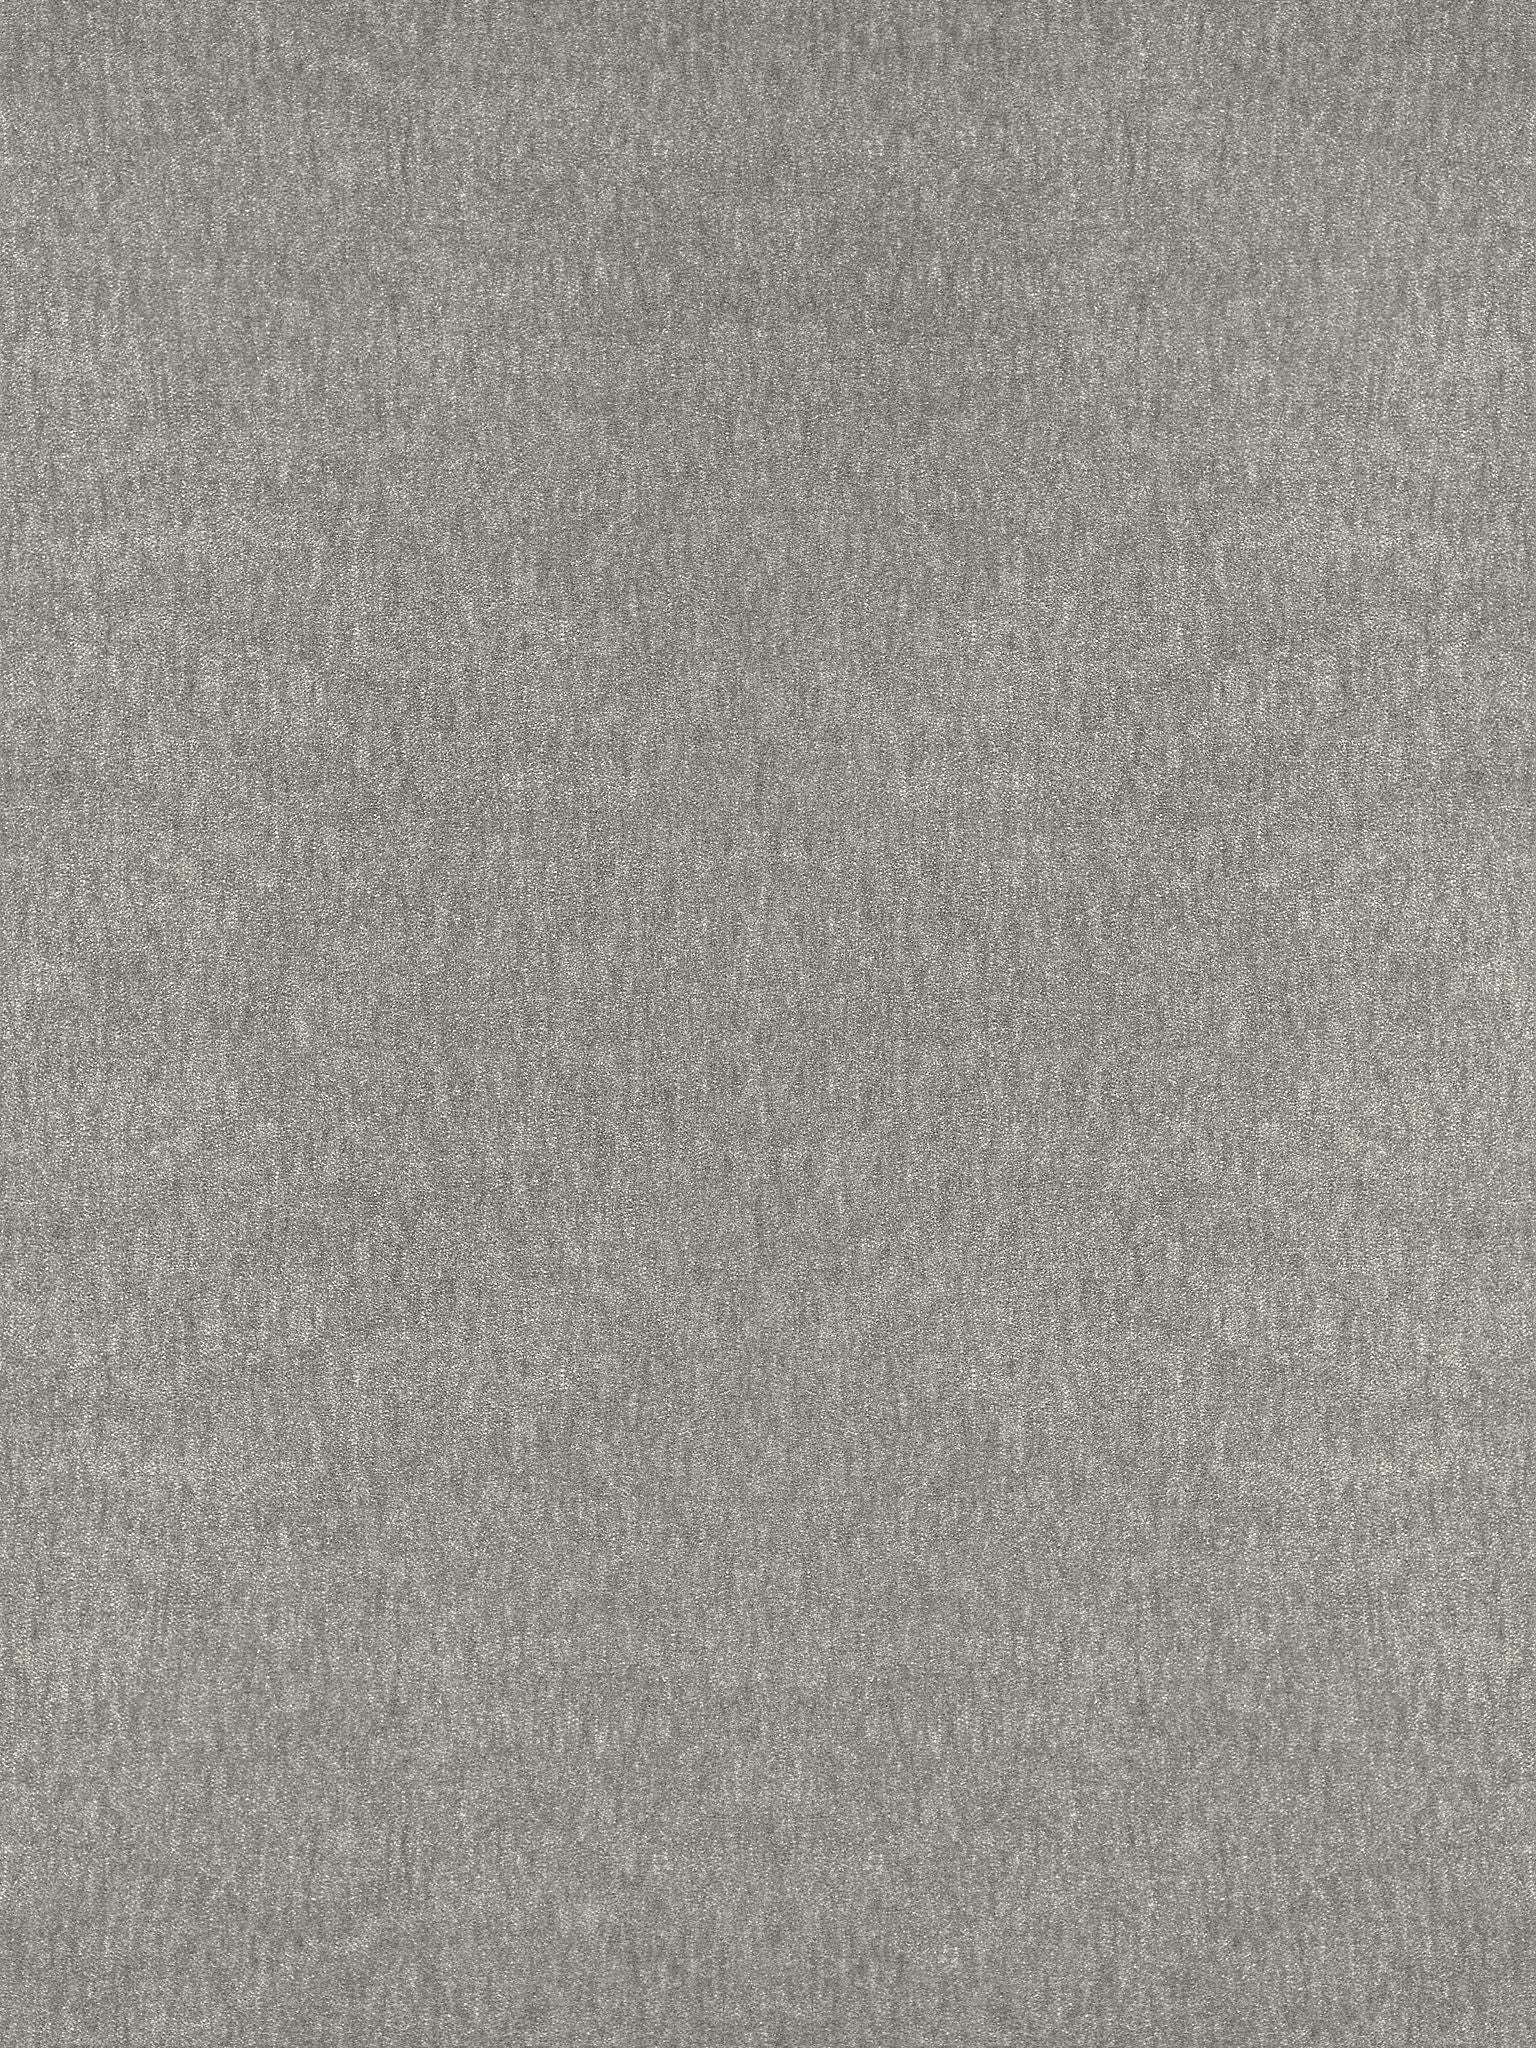 Bay Velvet fabric in smoke color - pattern number SC 000327193 - by Scalamandre in the Scalamandre Fabrics Book 1 collection